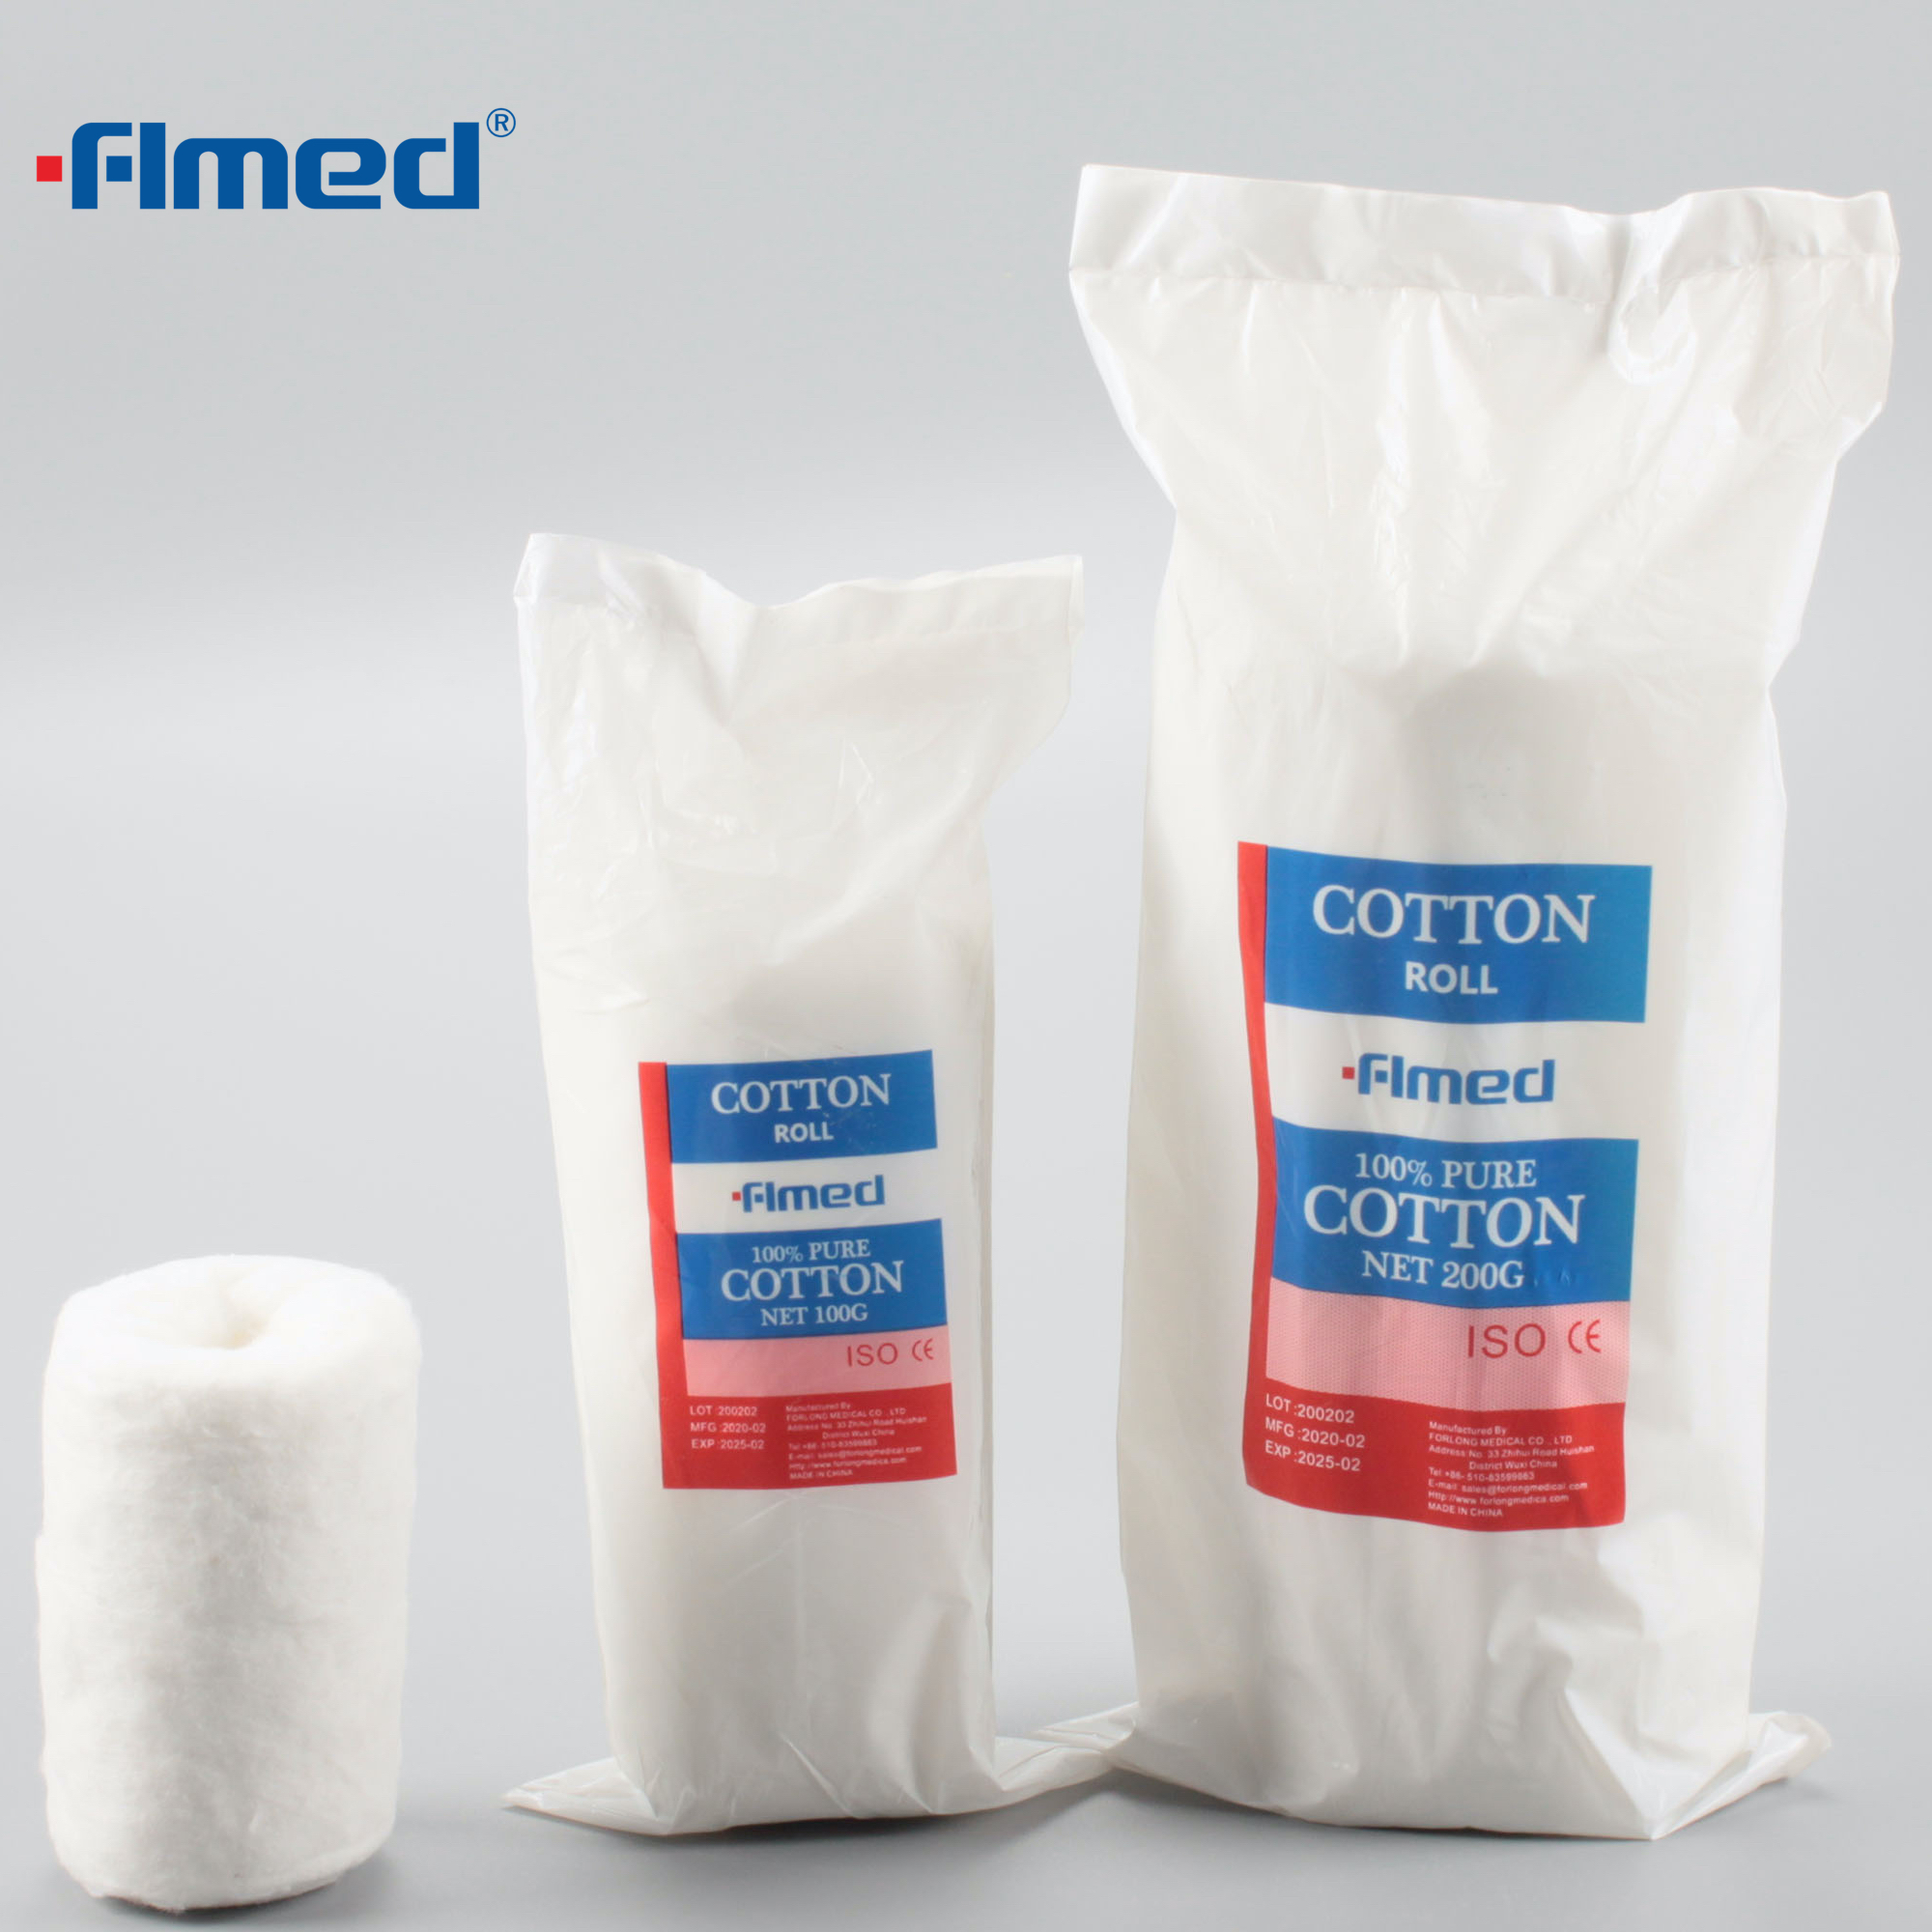 Surgical Medical Absorbent Hydrophilic 100% Cotton Wool Roll from China  manufacturer - Forlong Medical